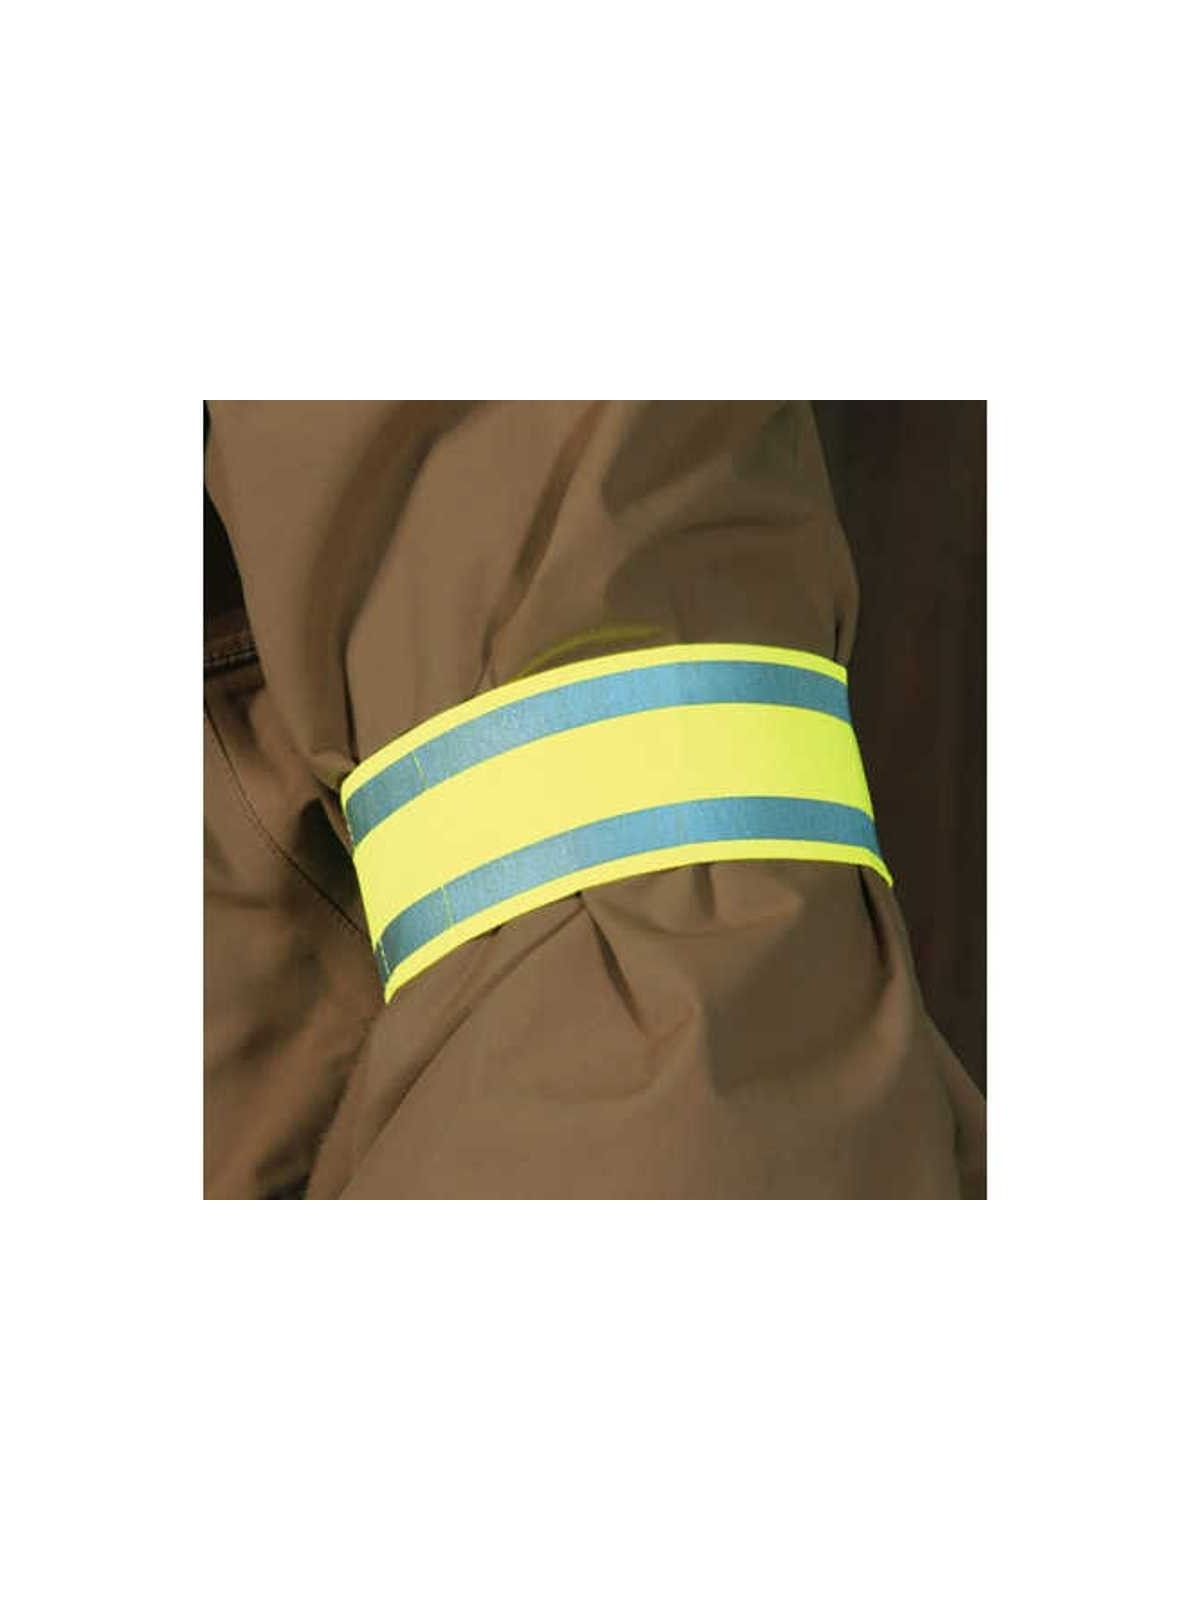 Reflex Armband highly reflexive for upper arm